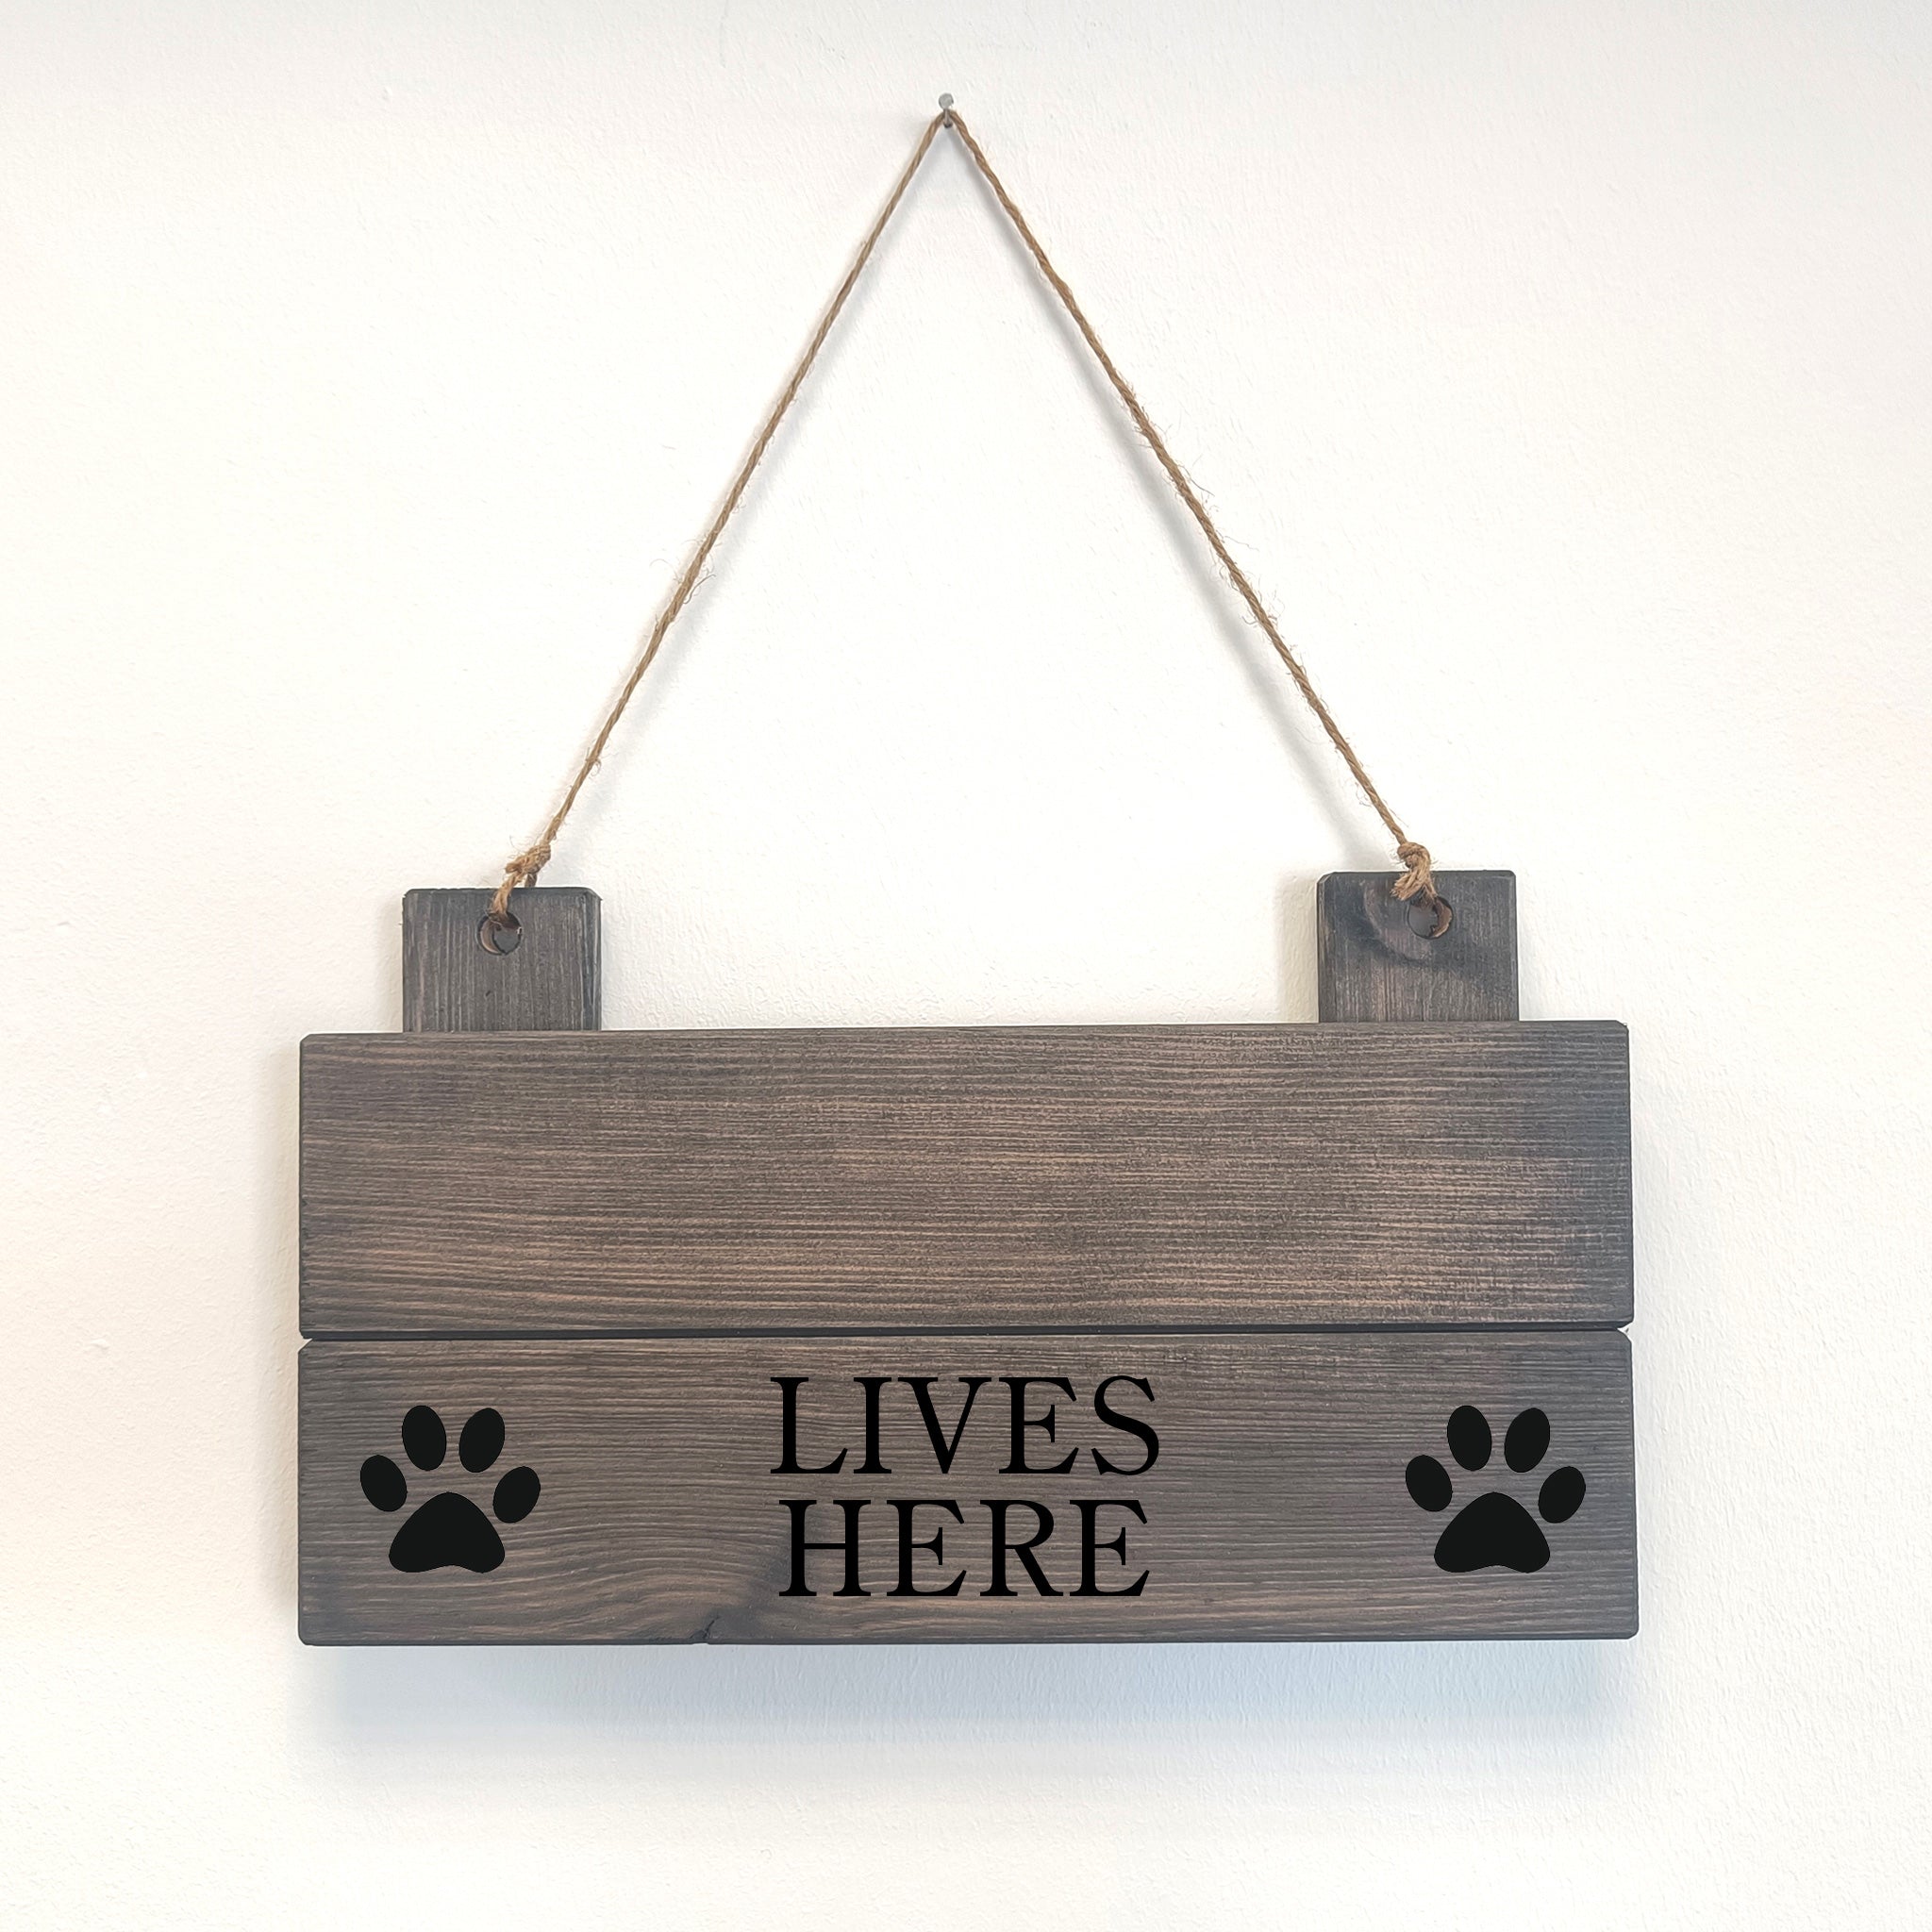 Stylish personalised Living room sign for dogs, cats